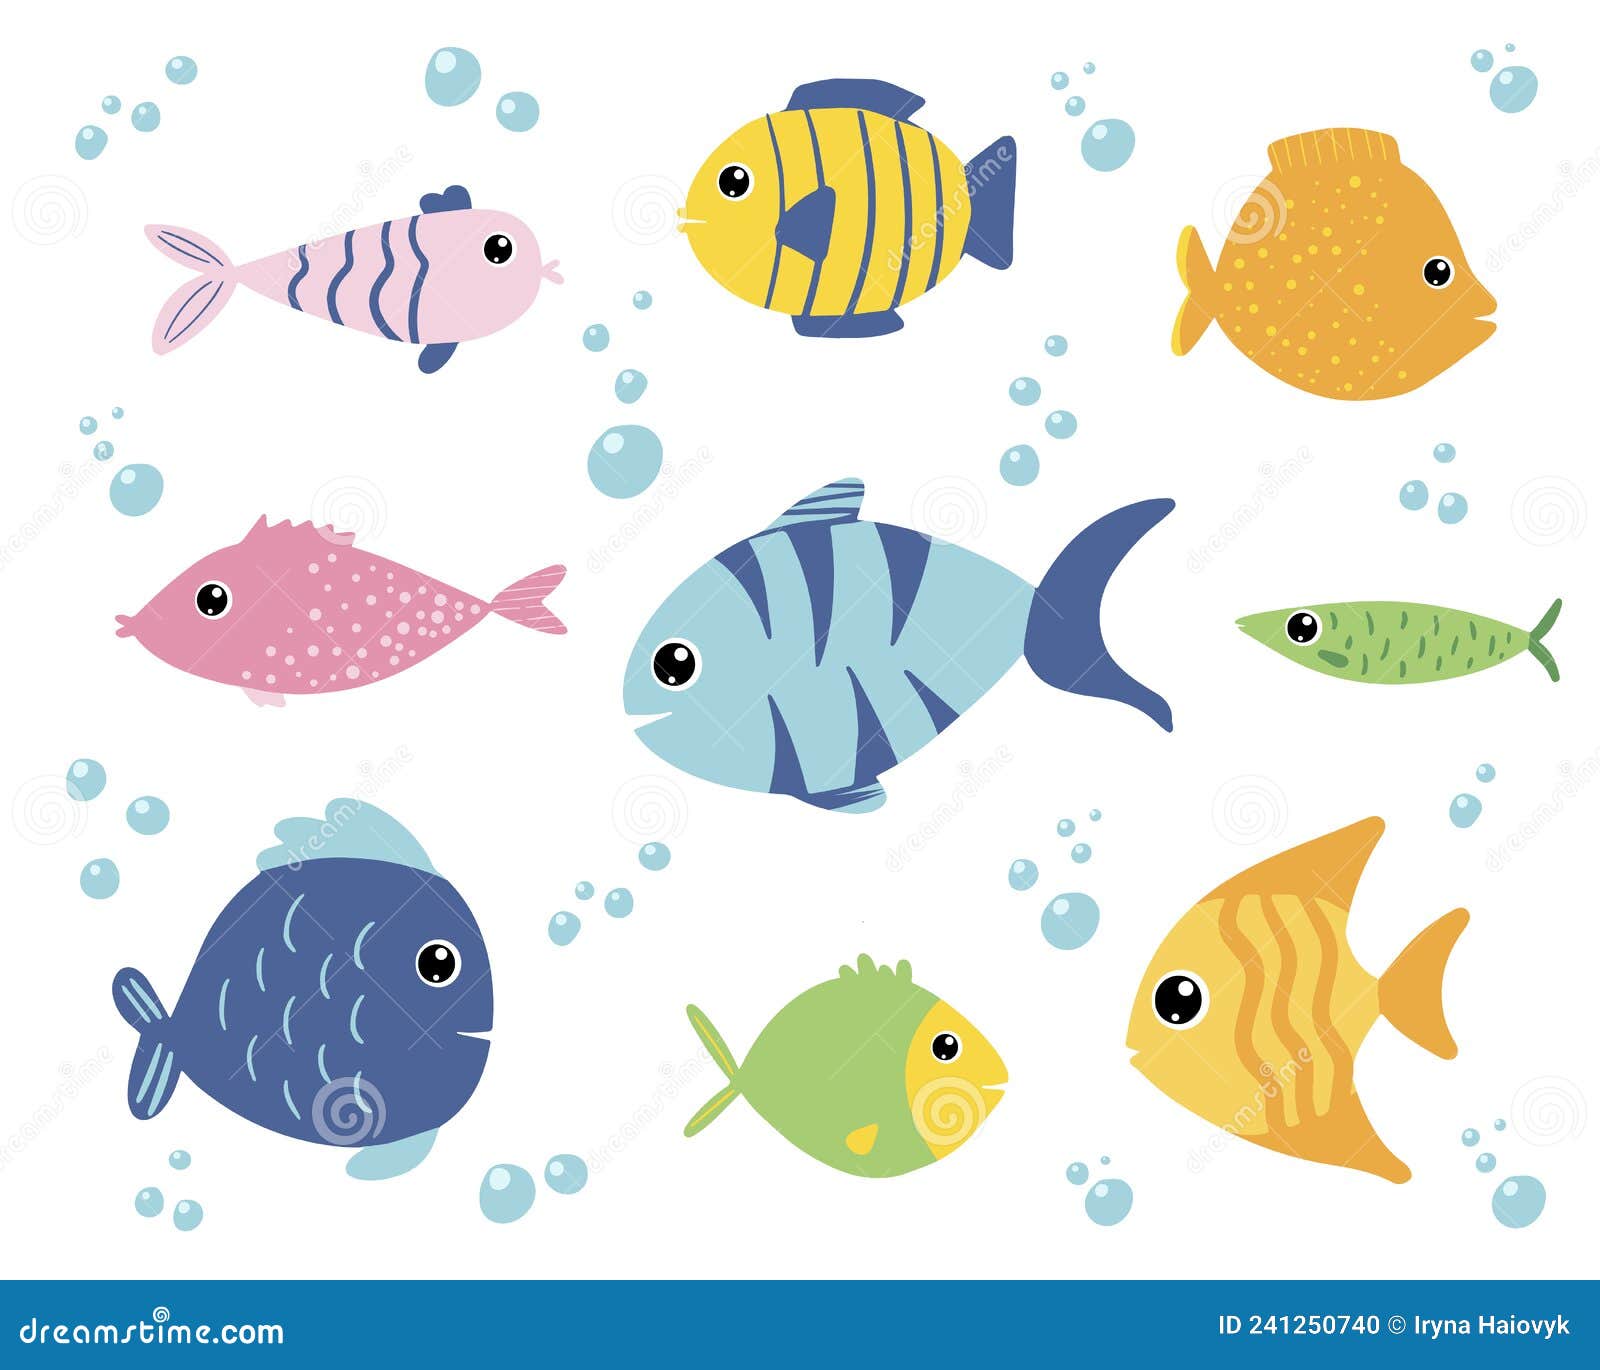 Cute Cartoon Set with Fishes in Bright Colors with Design Elements ...